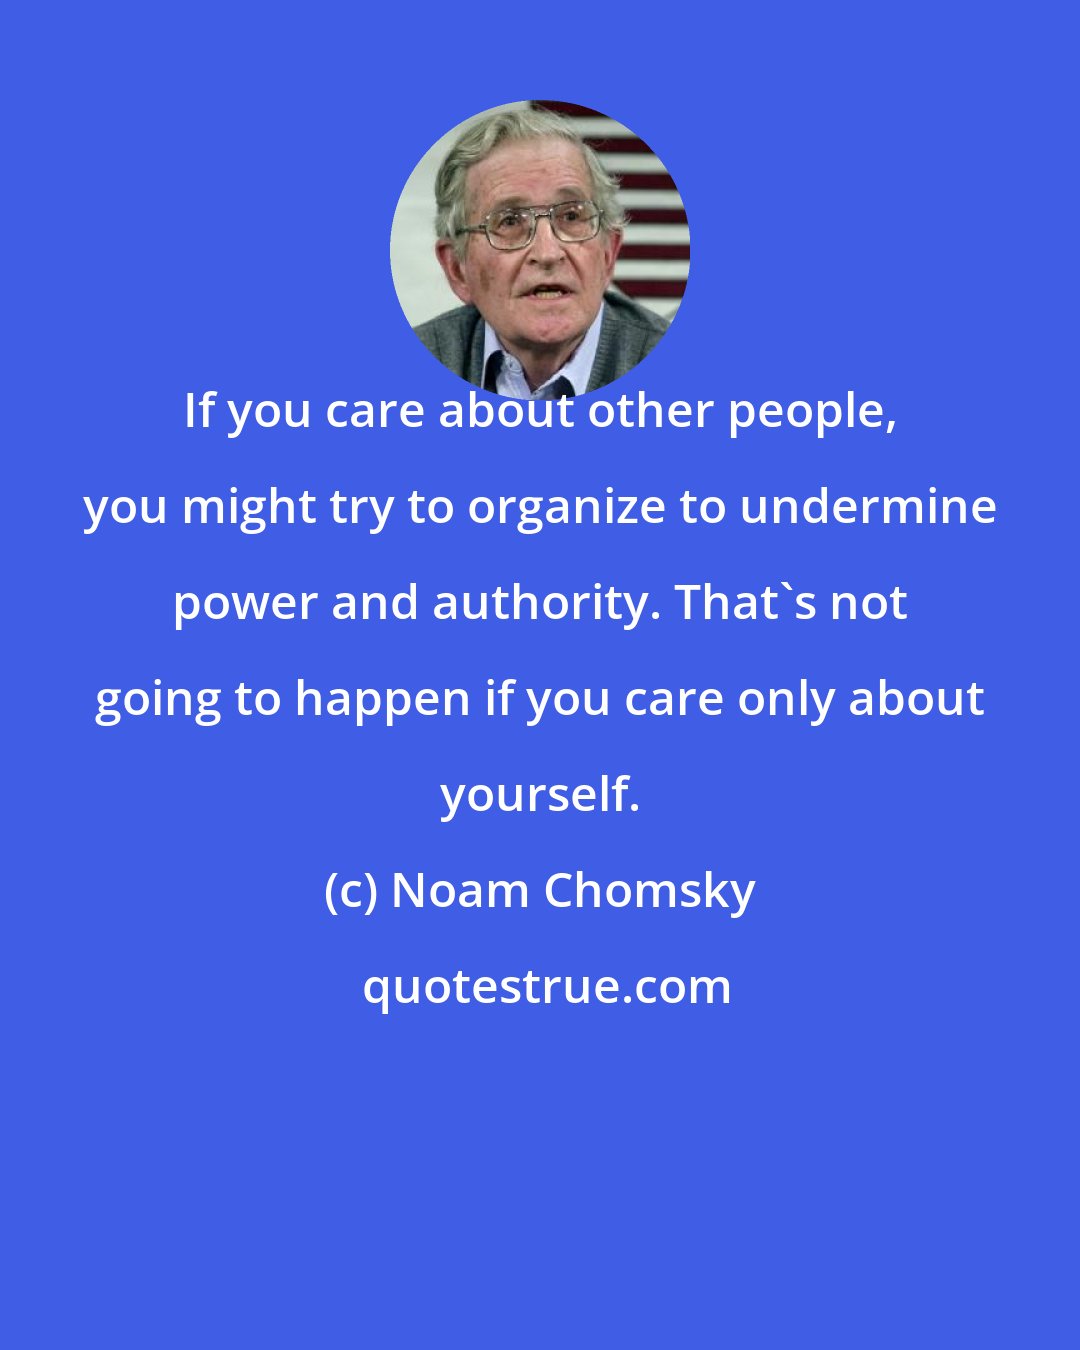 Noam Chomsky: If you care about other people, you might try to organize to undermine power and authority. That's not going to happen if you care only about yourself.